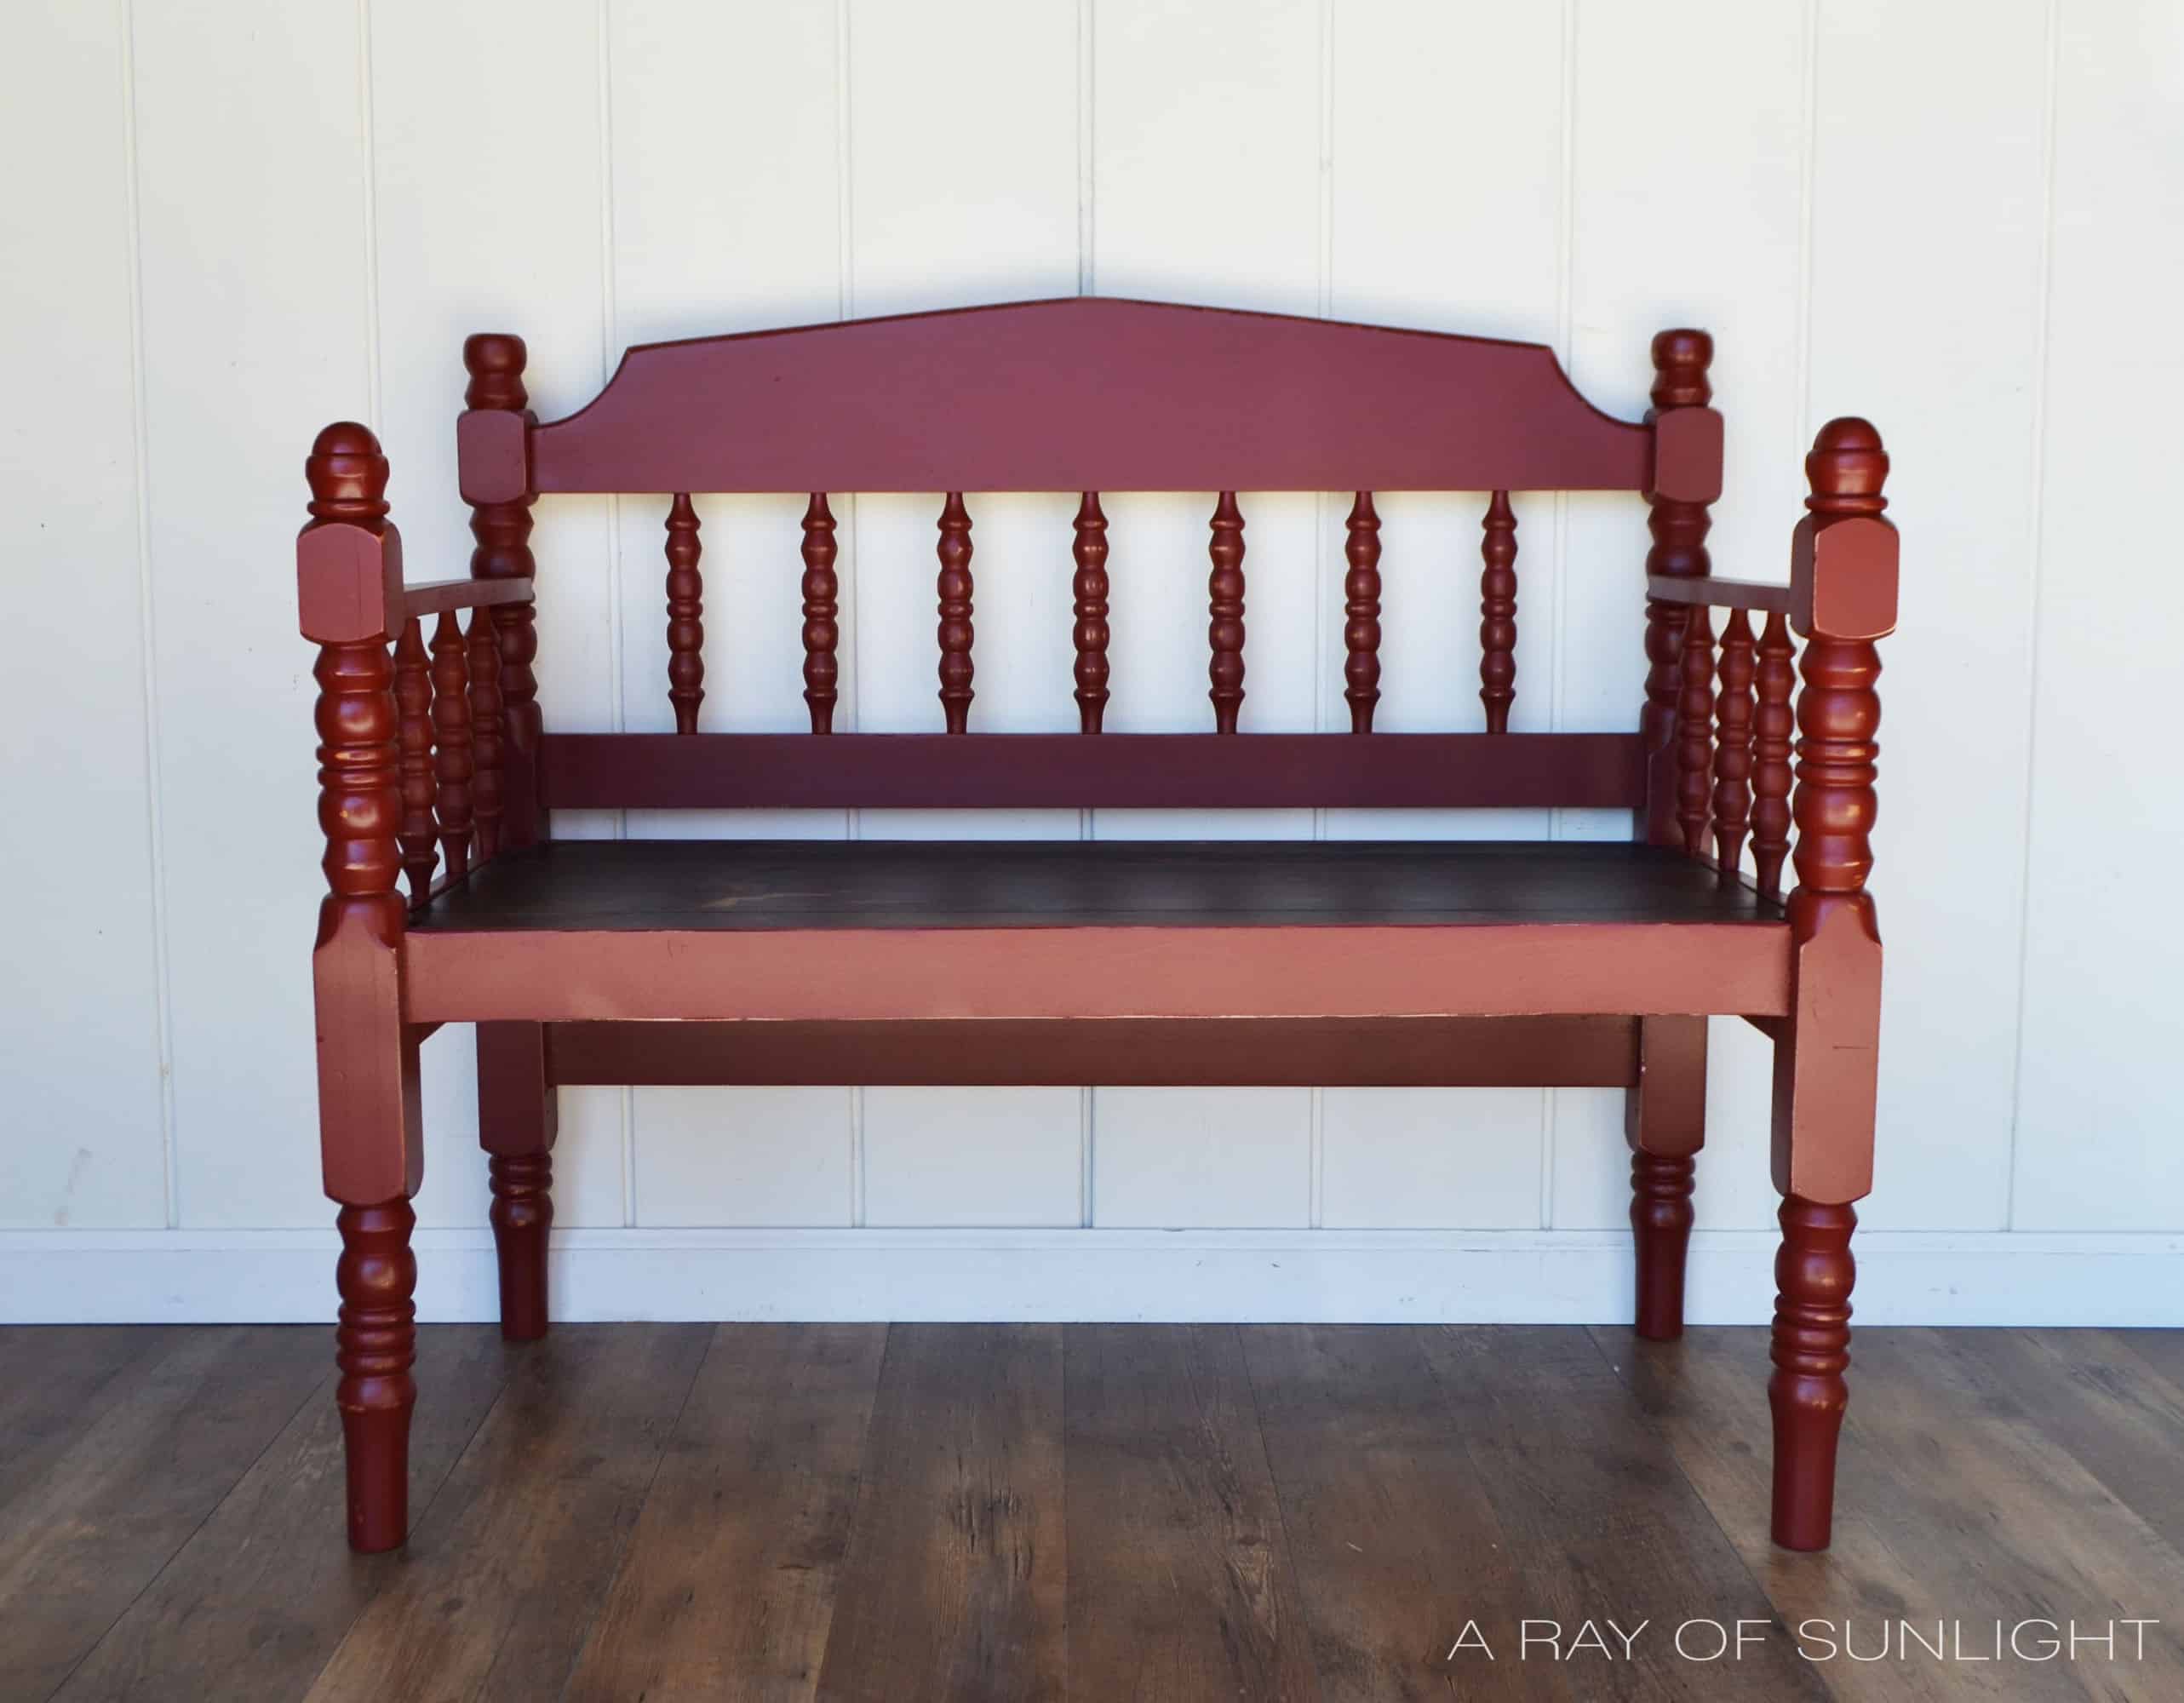 How to Make a Bench from a Headboard and Footboard